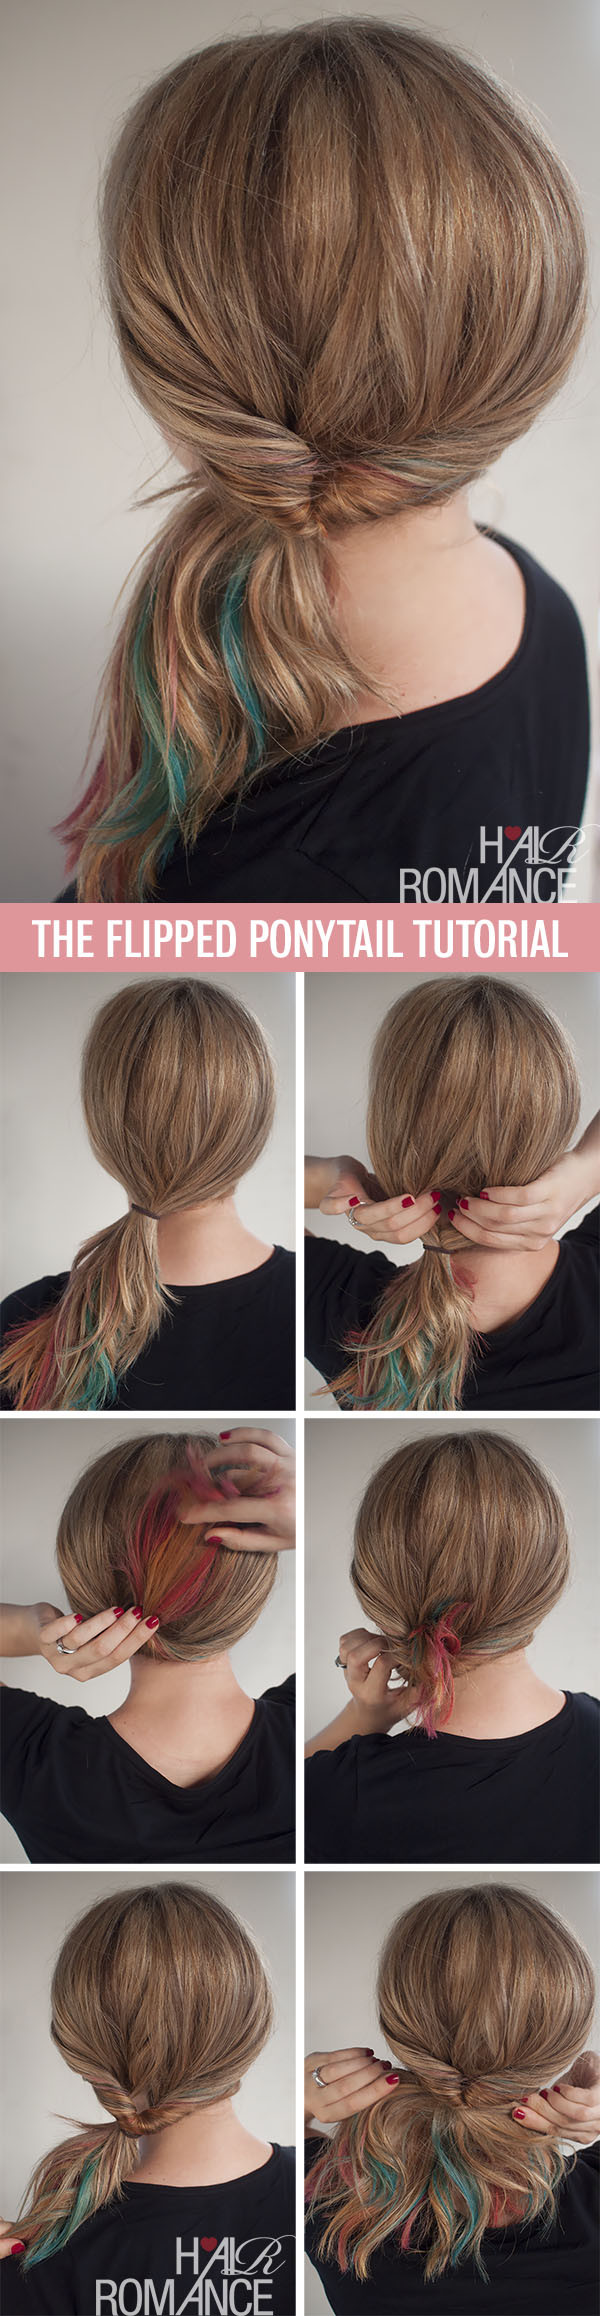 Cute Hairstyles Step By Step
 Get cute hair in less than 1 minute the flipped ponytail